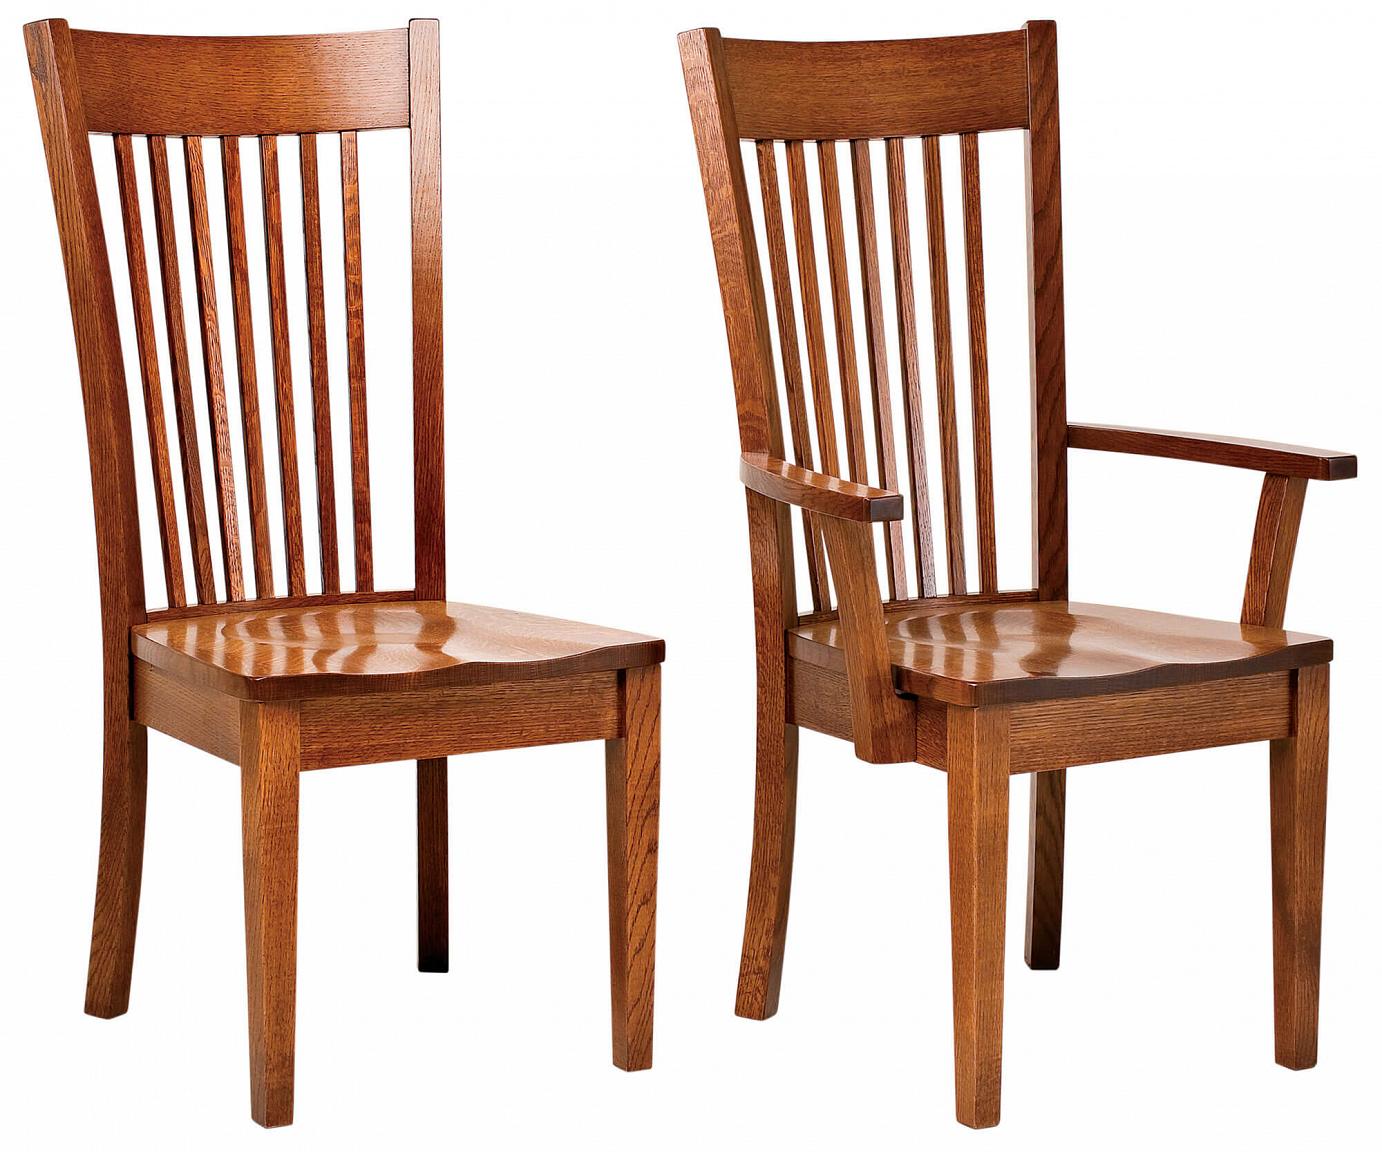 RH Yoder Mill Valley Chairs